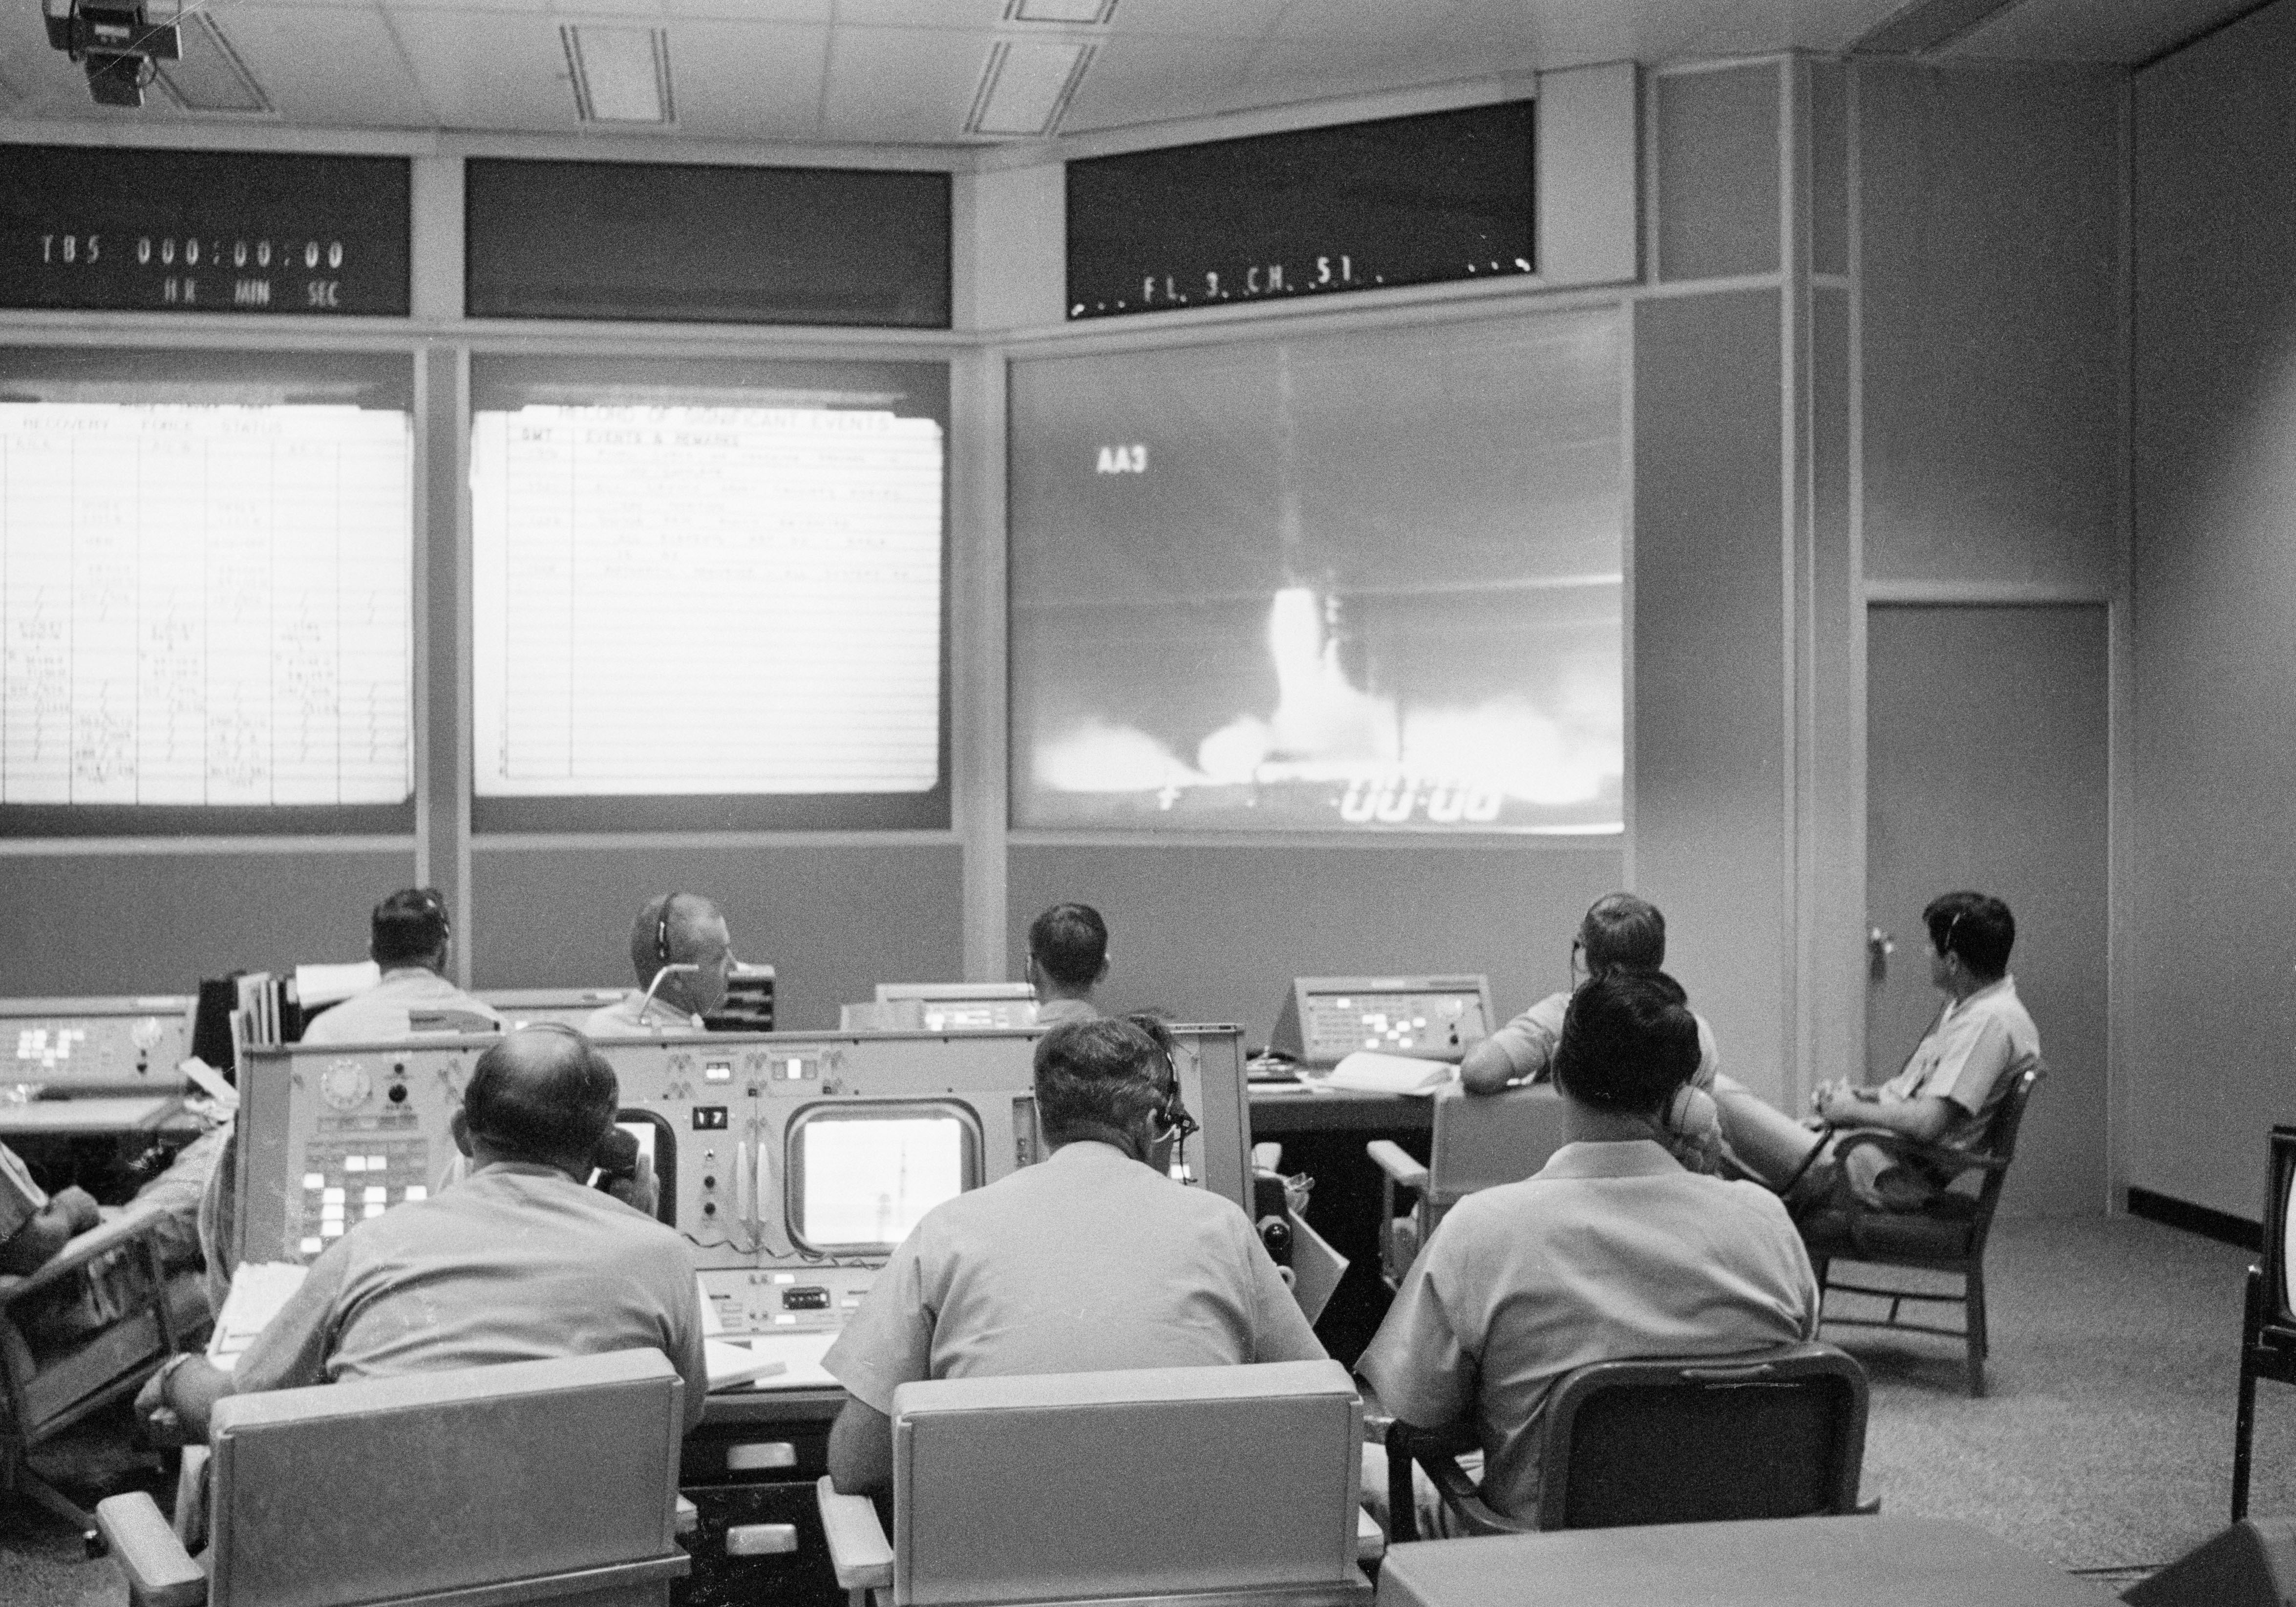 Engineers in the Mission Control Center at the Manned Spacecraft Center, now NASA's Johnson Space Center in Houston, take over control of the flight once the tower is clear